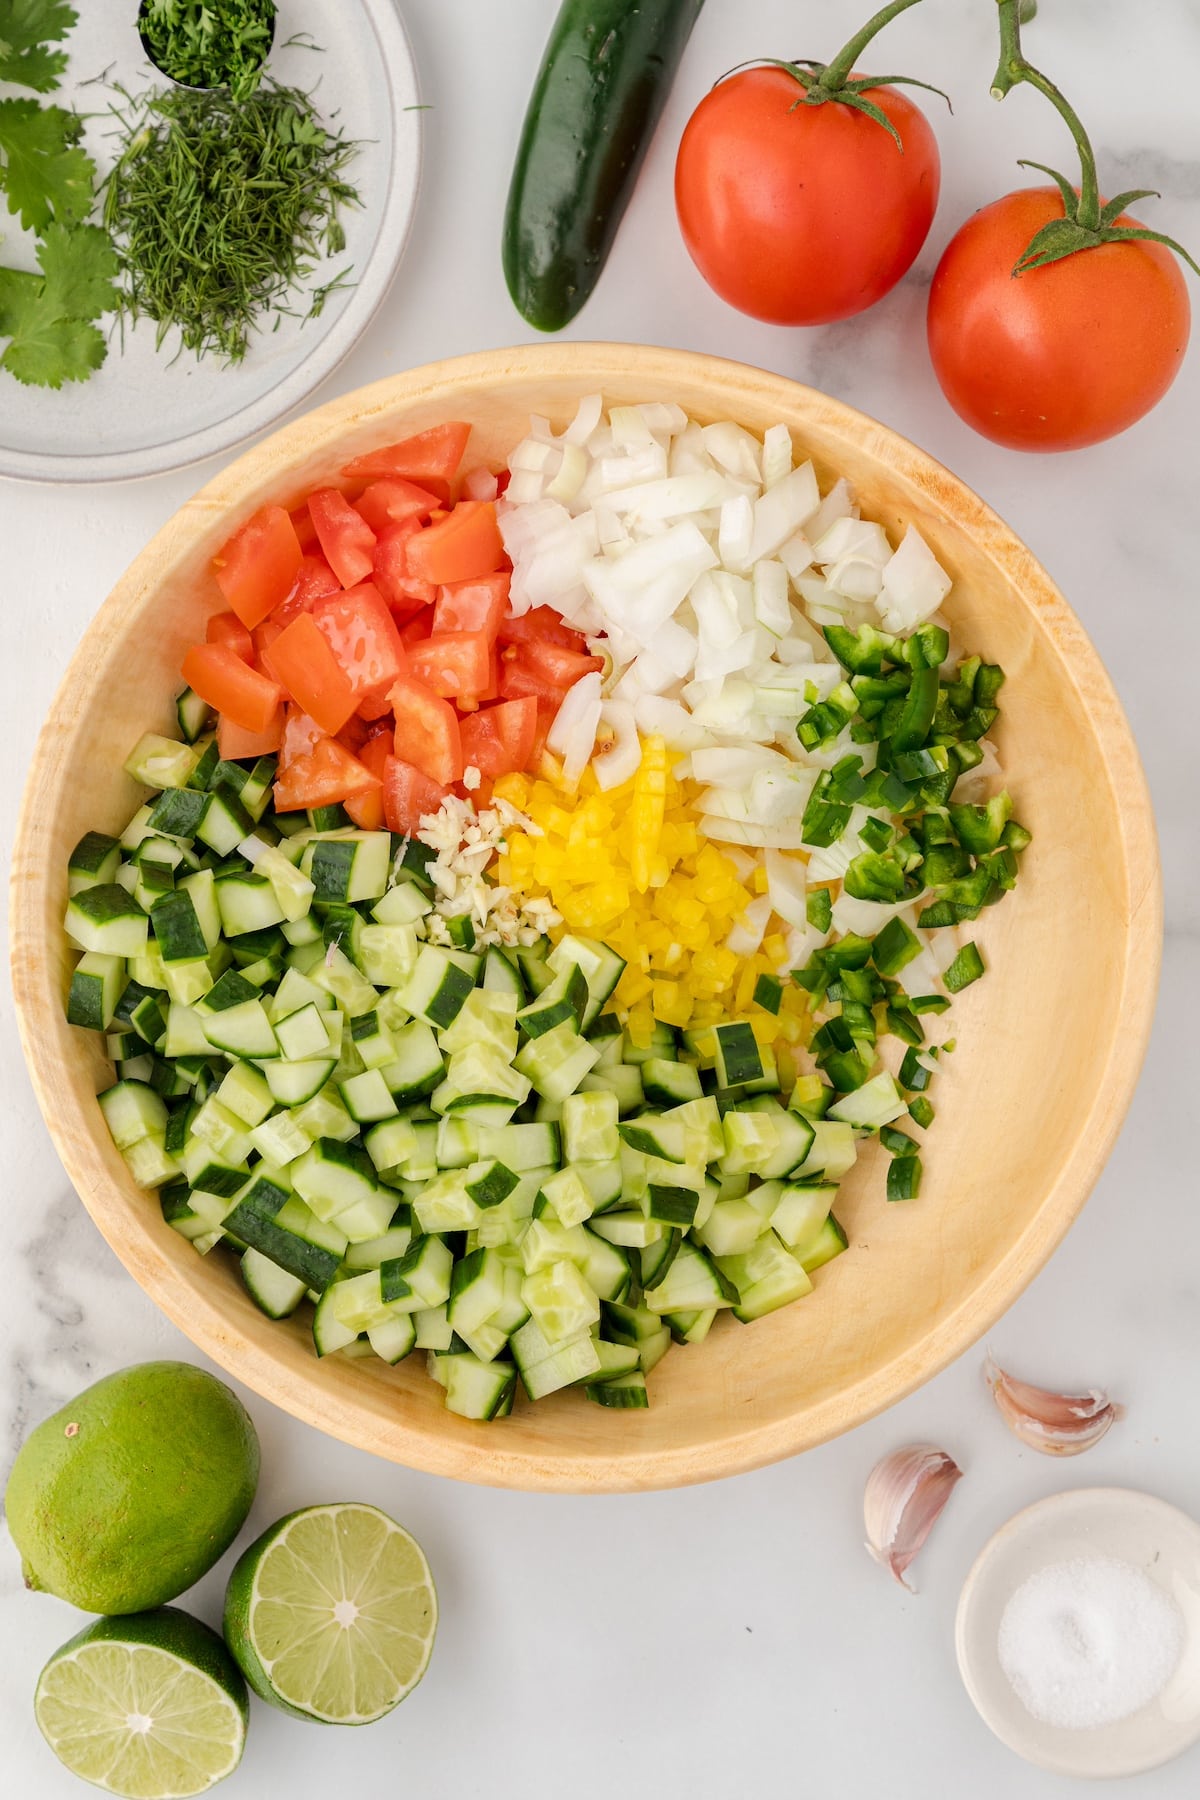 chop all the cucumber salsa ingredients and place them in a large bowl